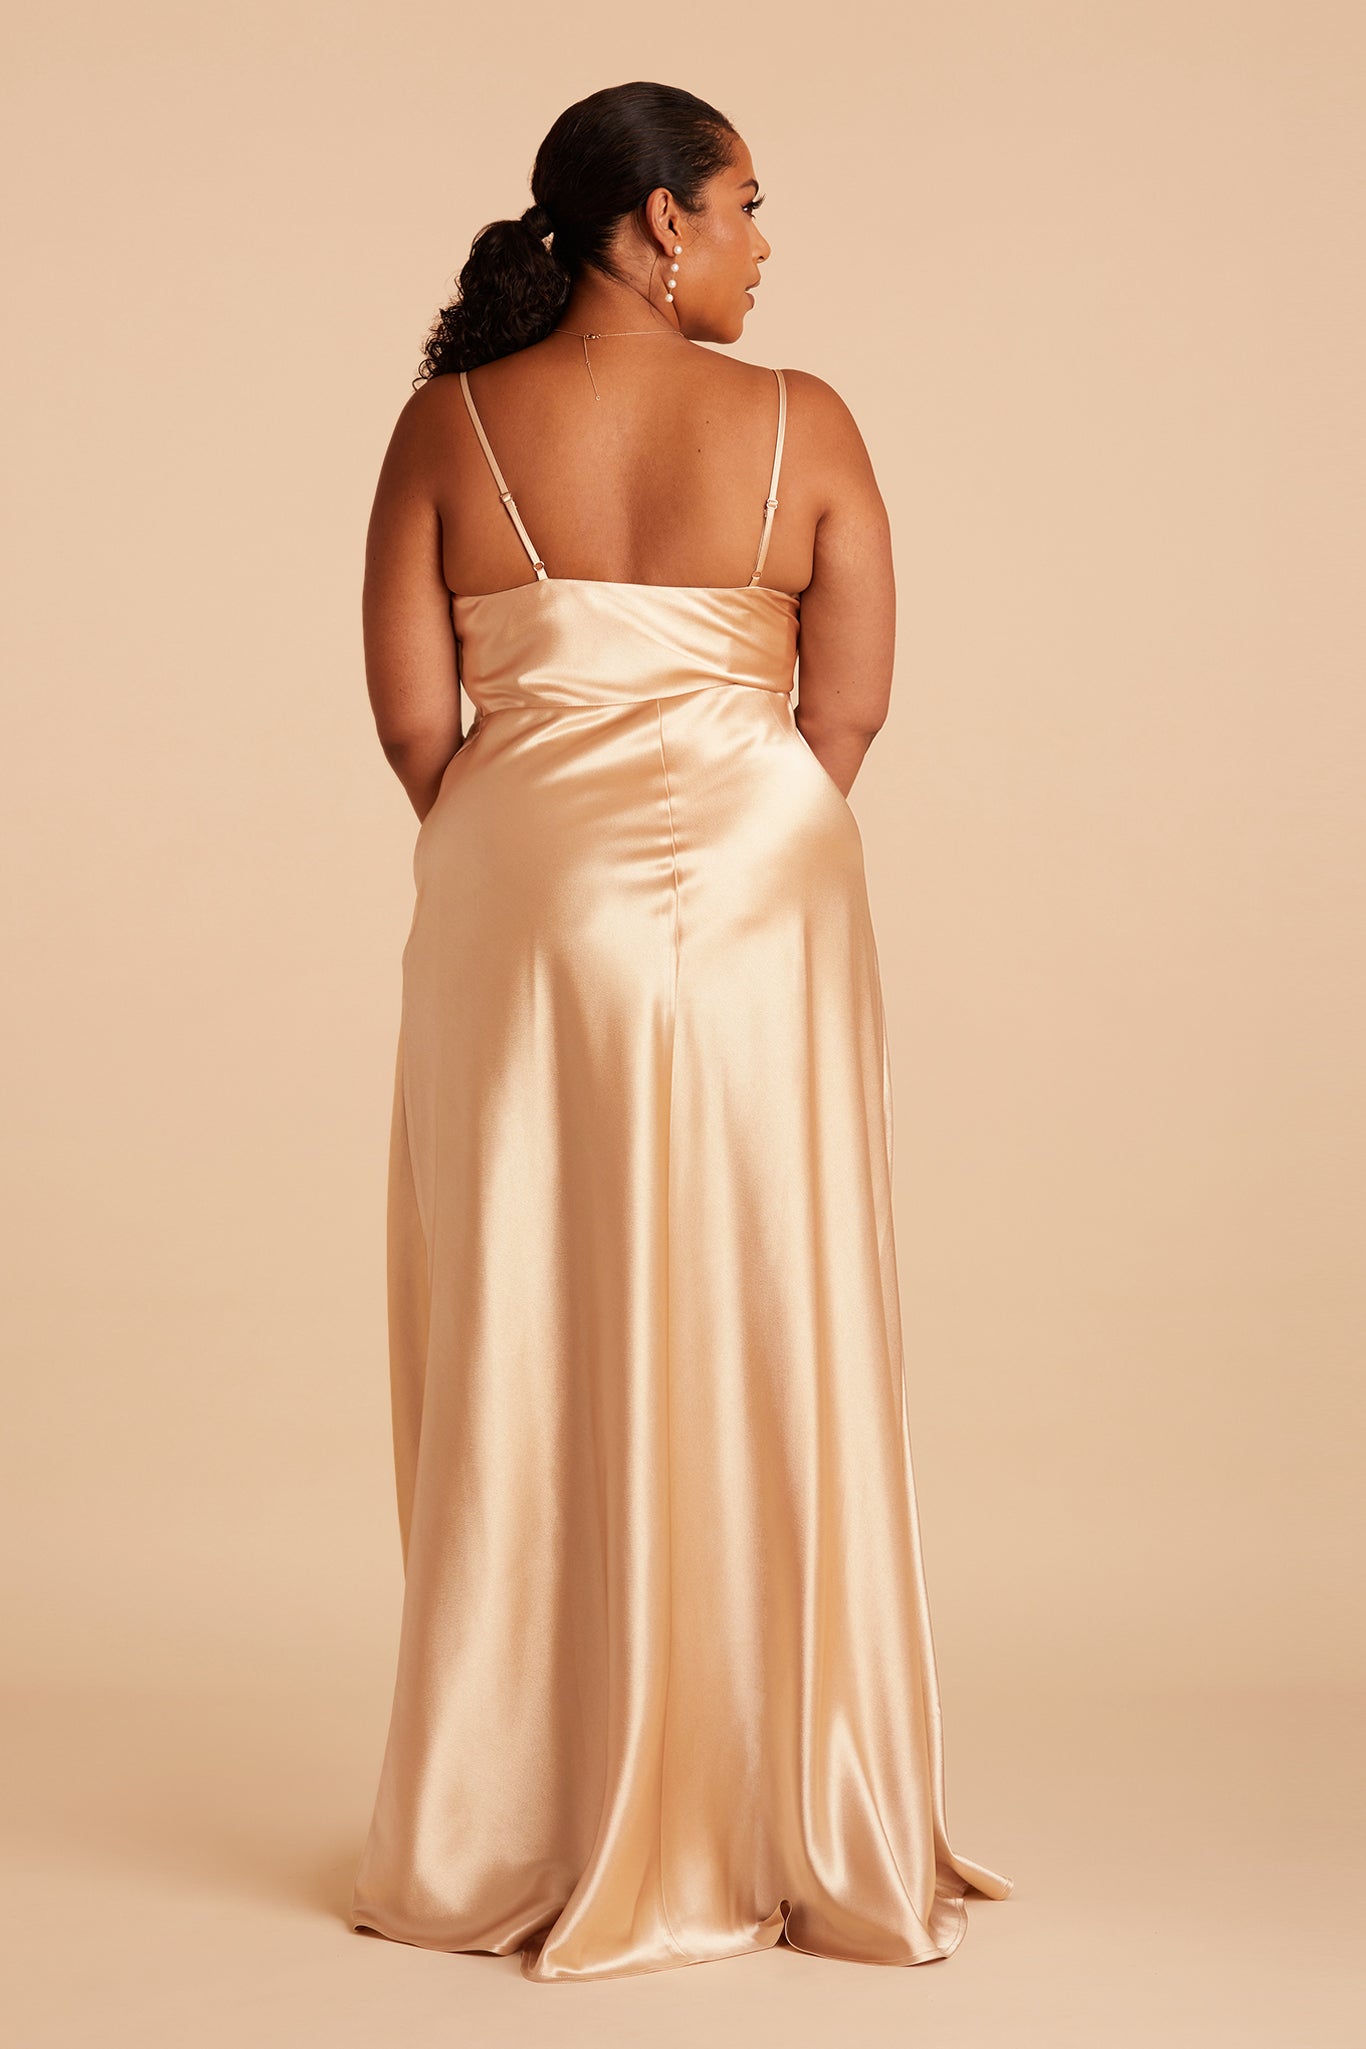 Back view of the Lisa Long Dress Curve in gold satin shows the back of the dress with adjustable spaghetti straps and a smooth fit in the bodice and waist that attach to a full length skirt.  